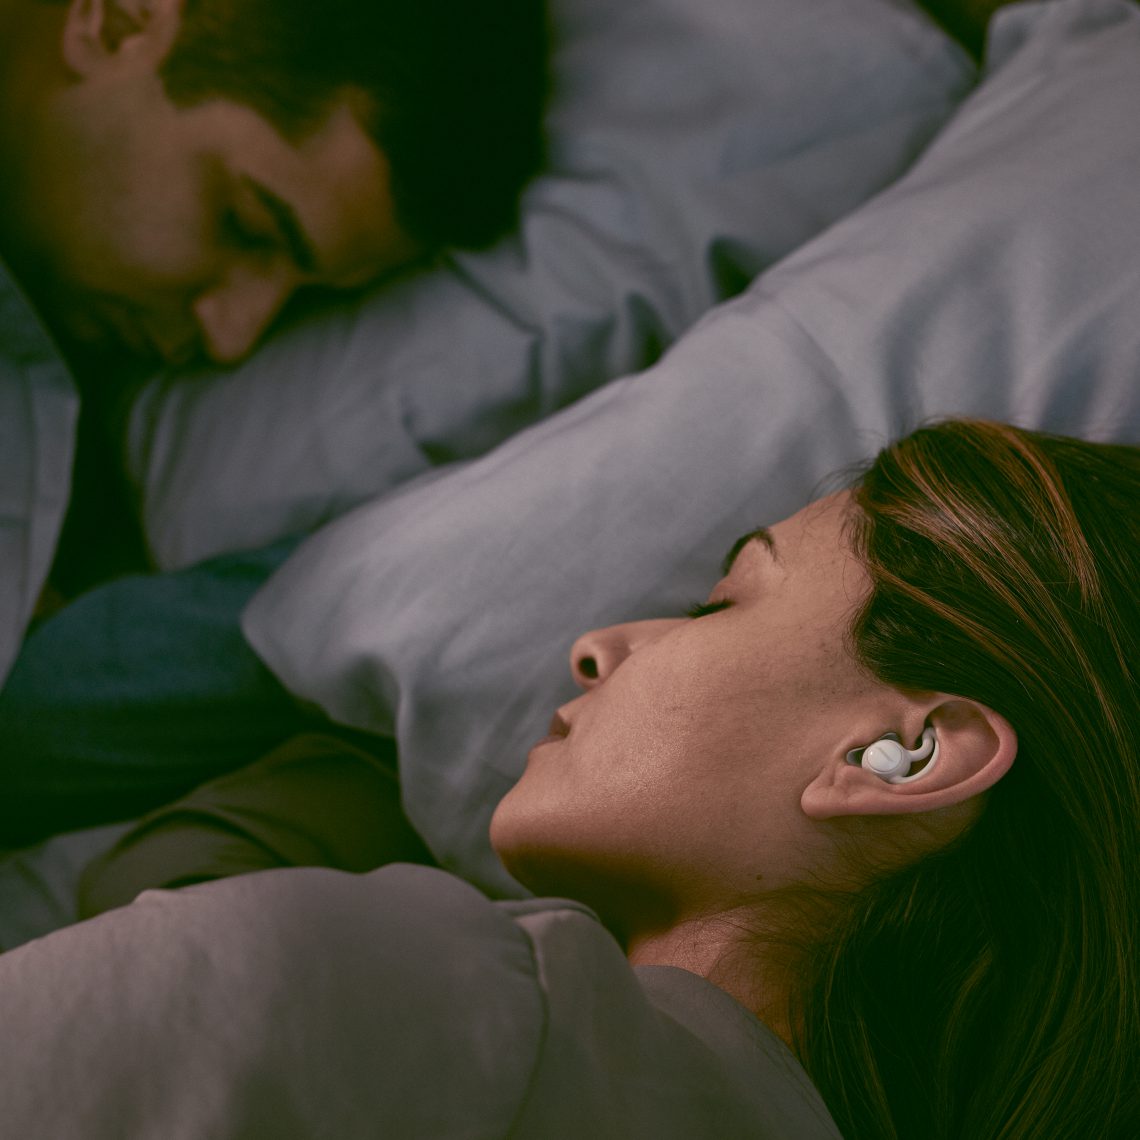 Review Bose Sleepbuds The Earbuds That Put You To Sleep